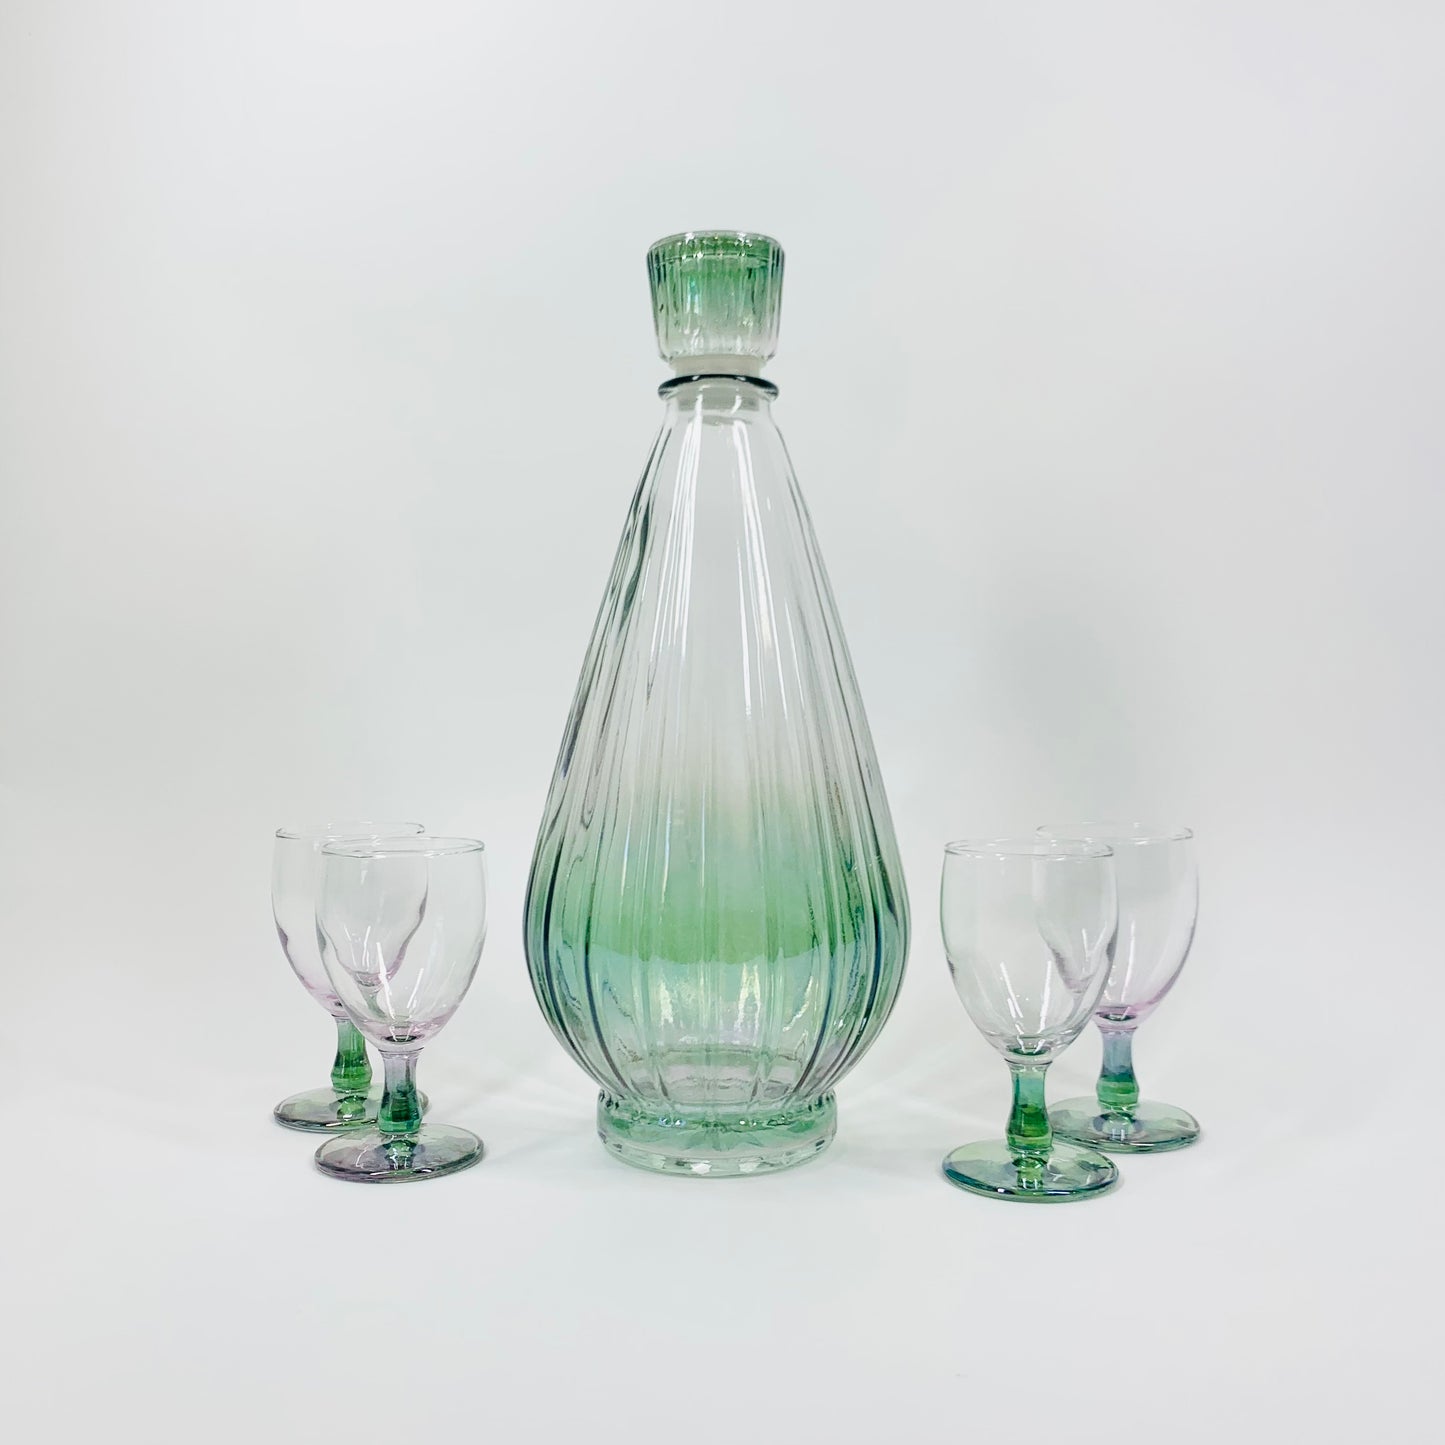 Extremely rare Midcentury American iridescent harlequin pressed glass decanter and matching glasses set